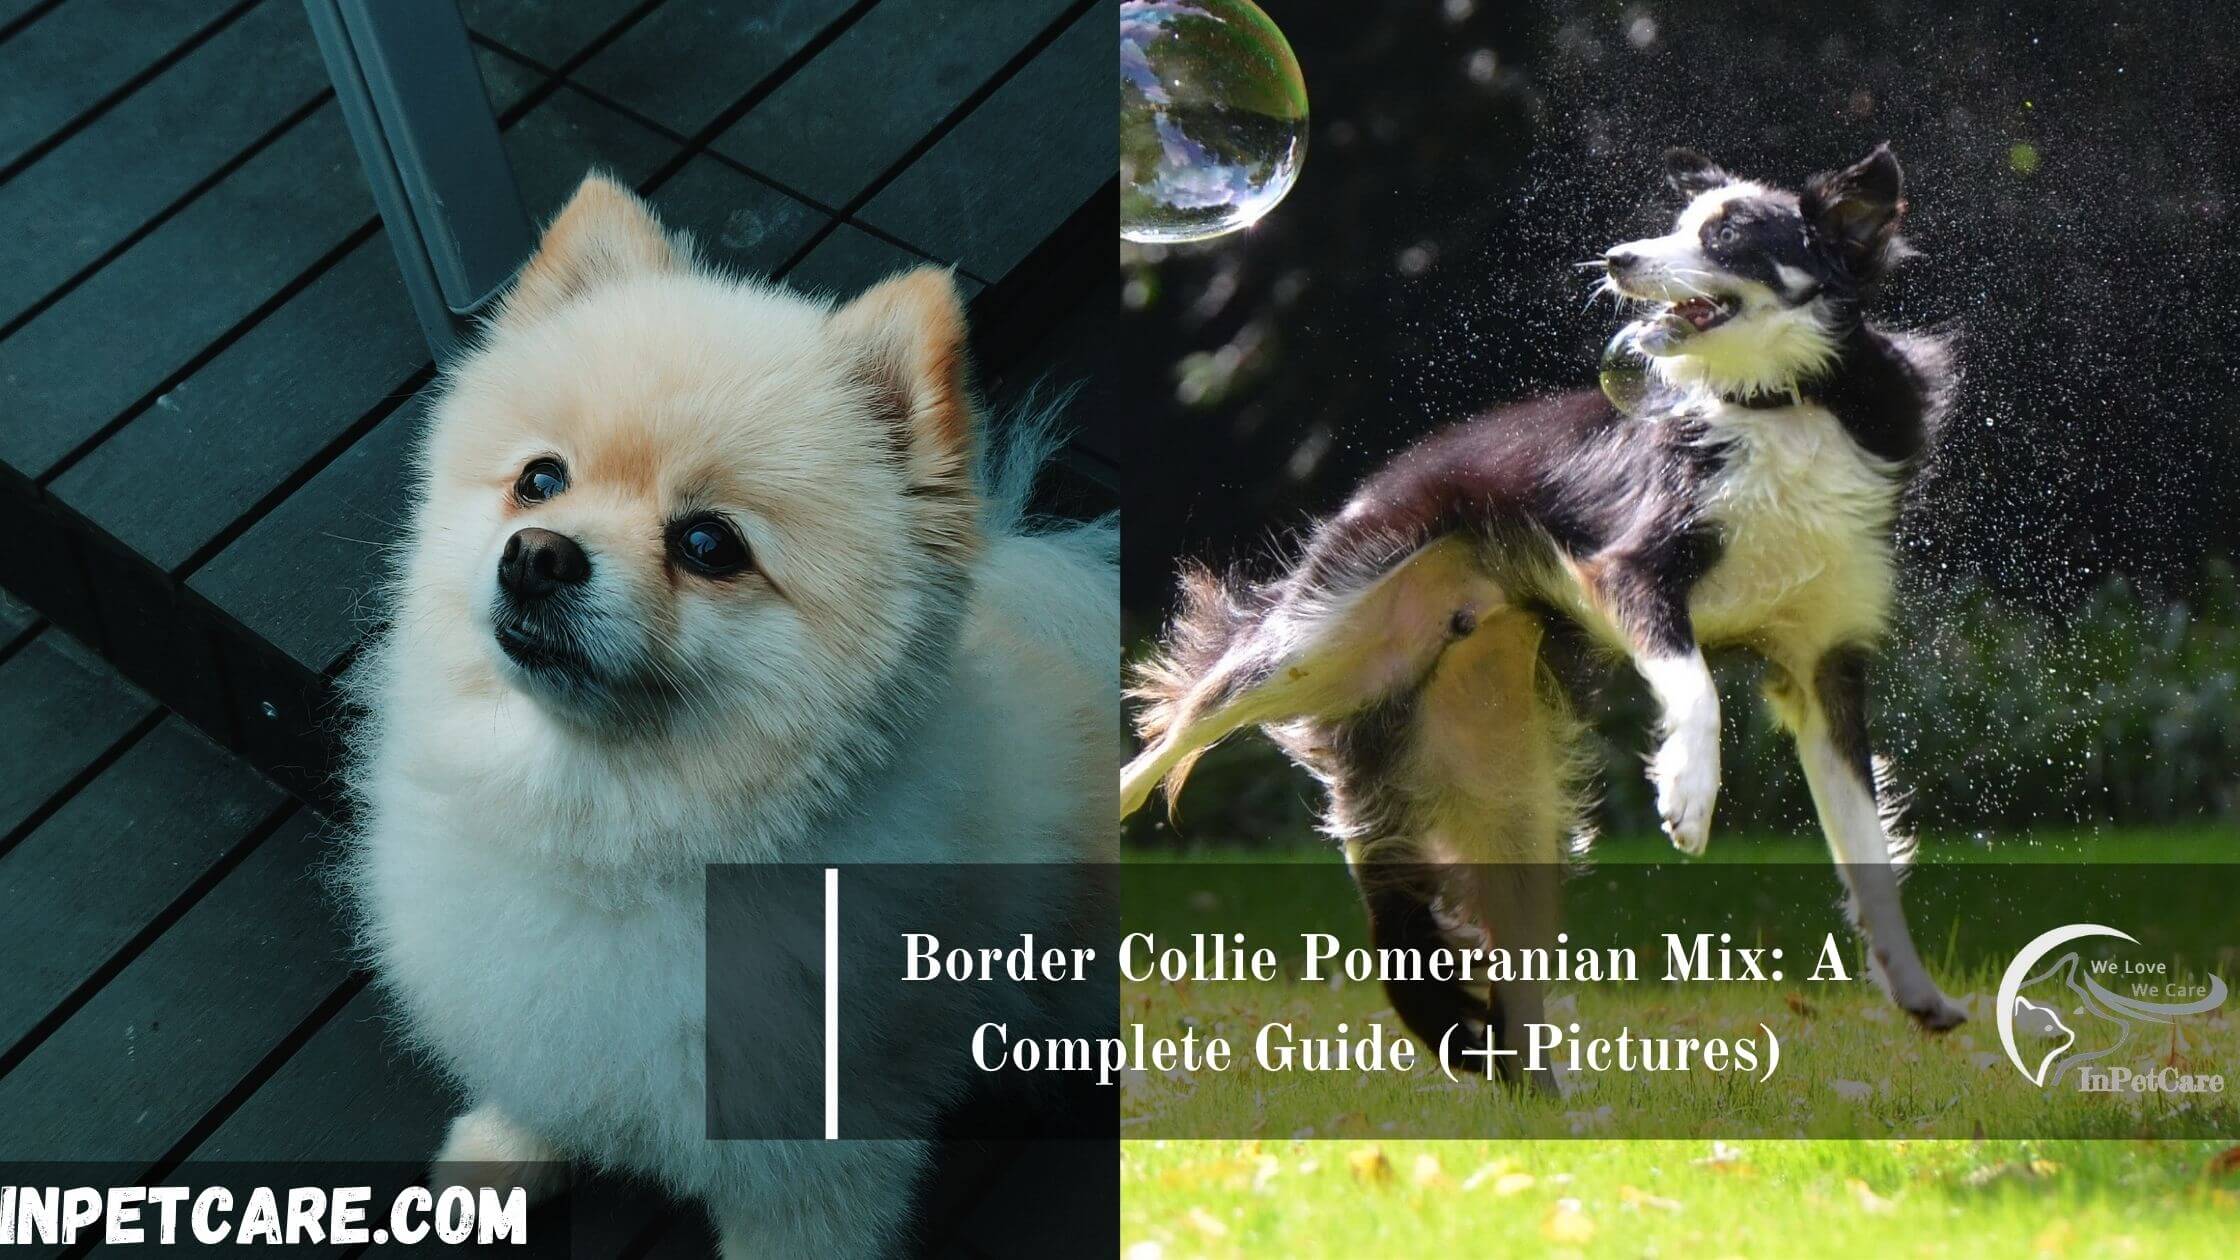 Border Collie Pomeranian Mix: A Complete Guide (+Pictures)